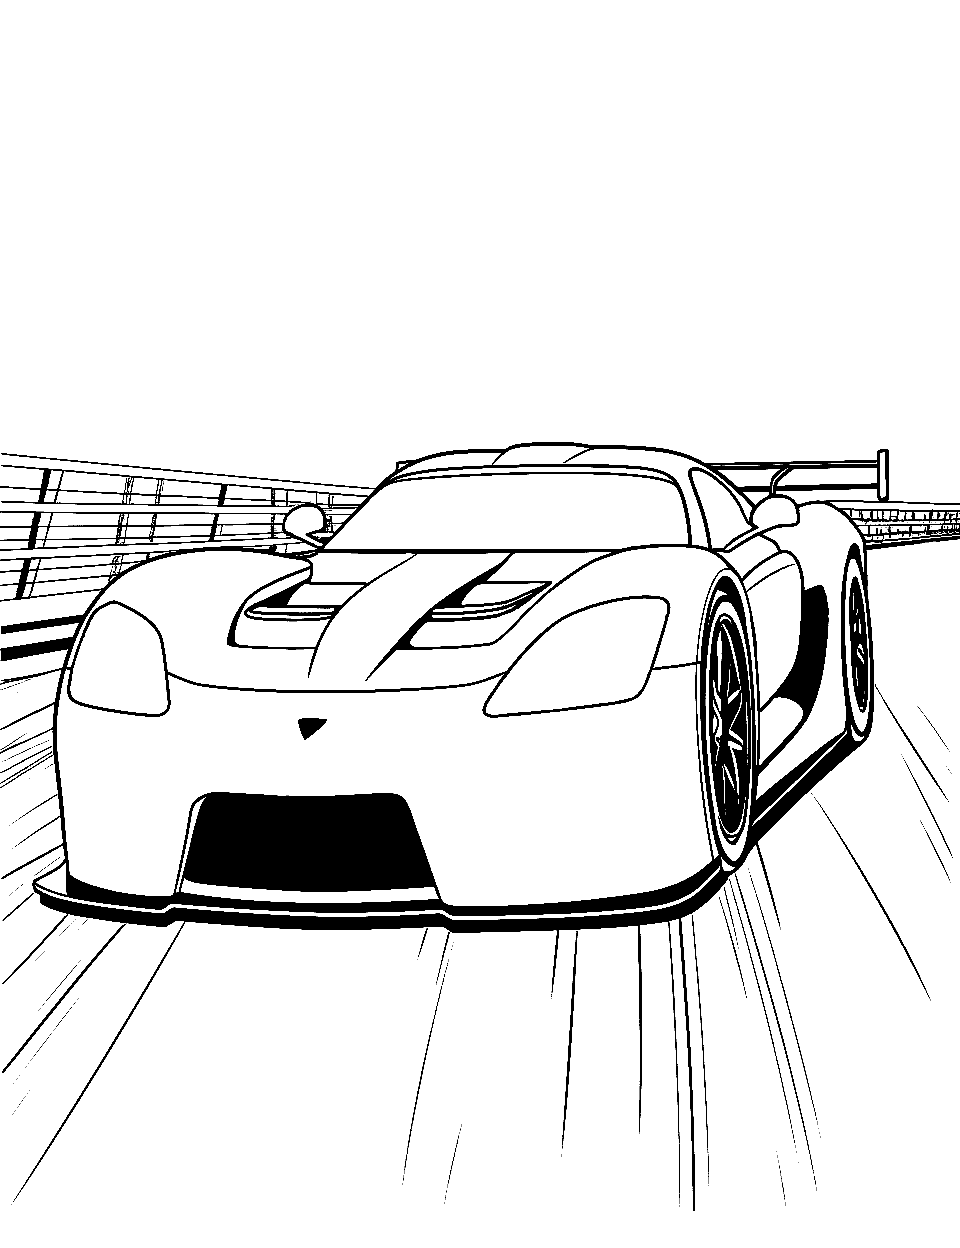 Sports Car Showdown Race Coloring Page - A modern sports car ready for a race.